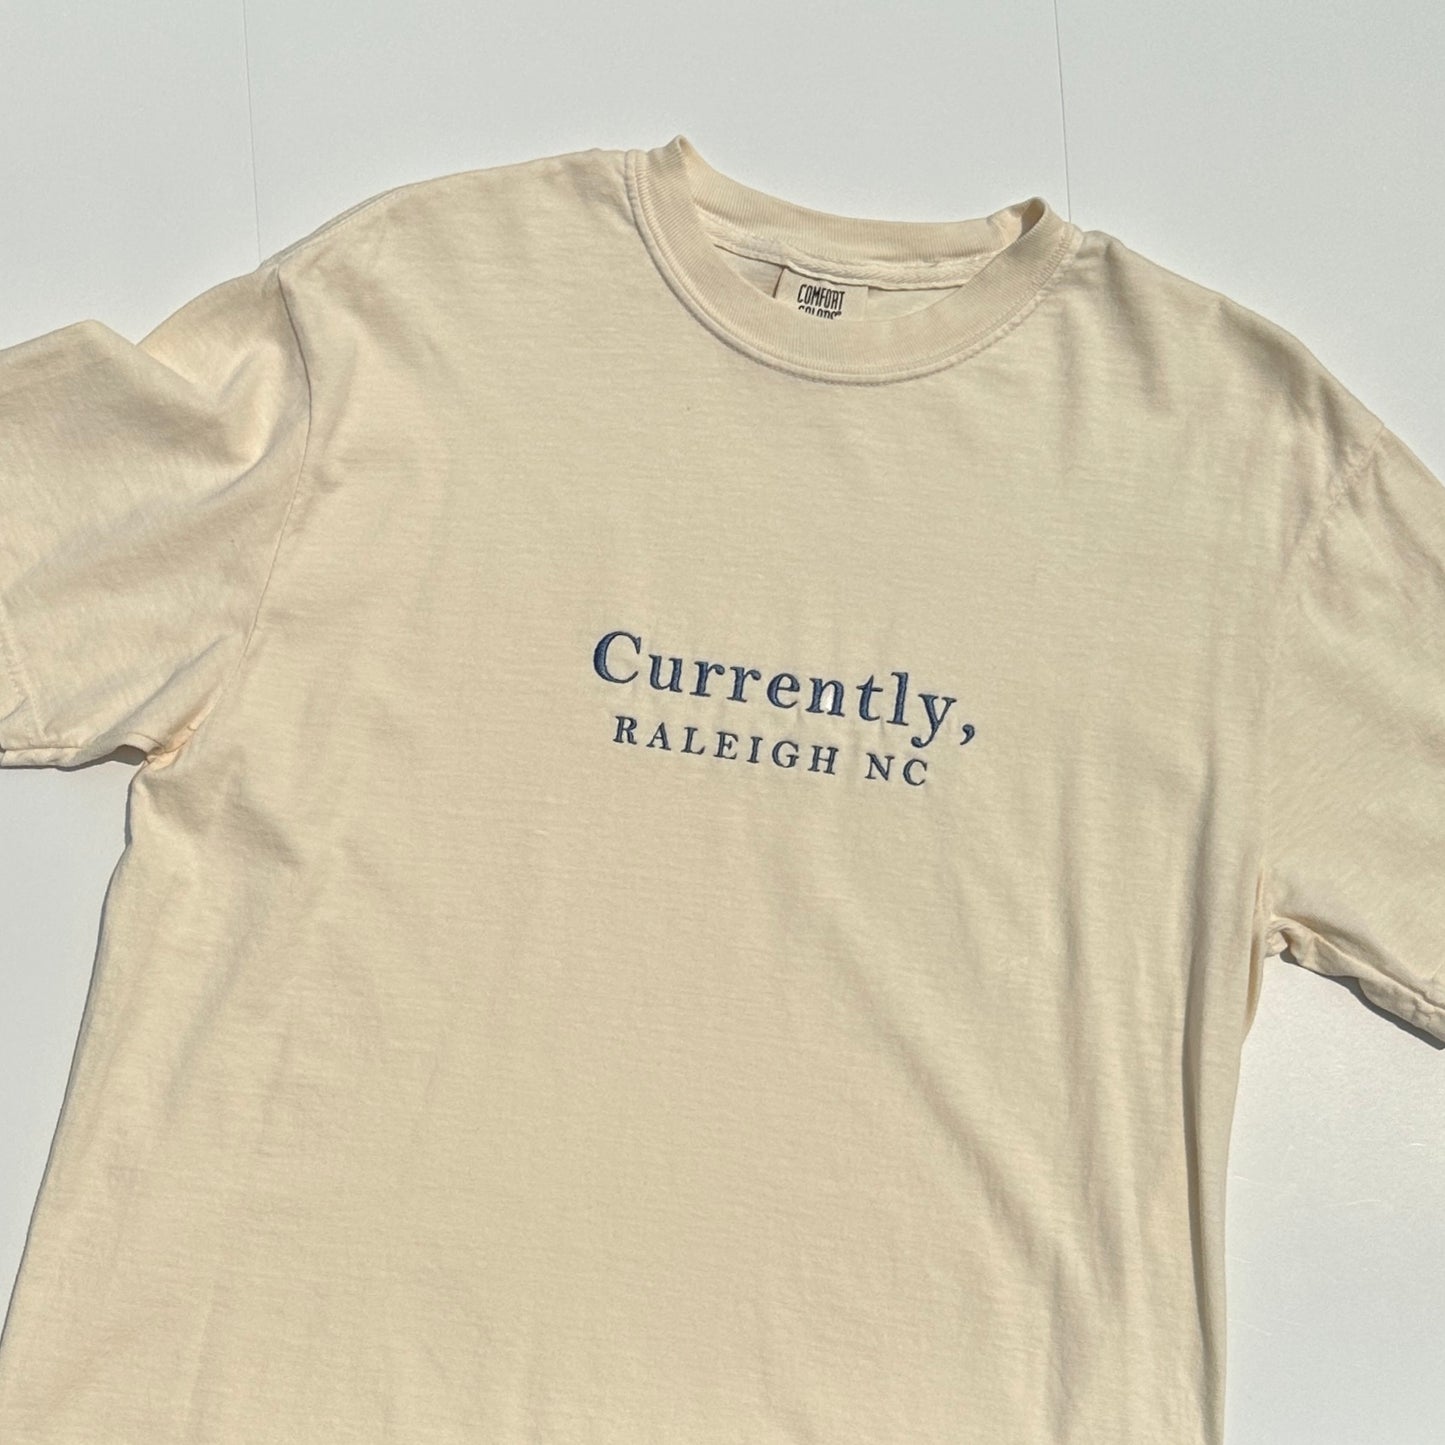 Currently, Cities Embroidered T-shirt